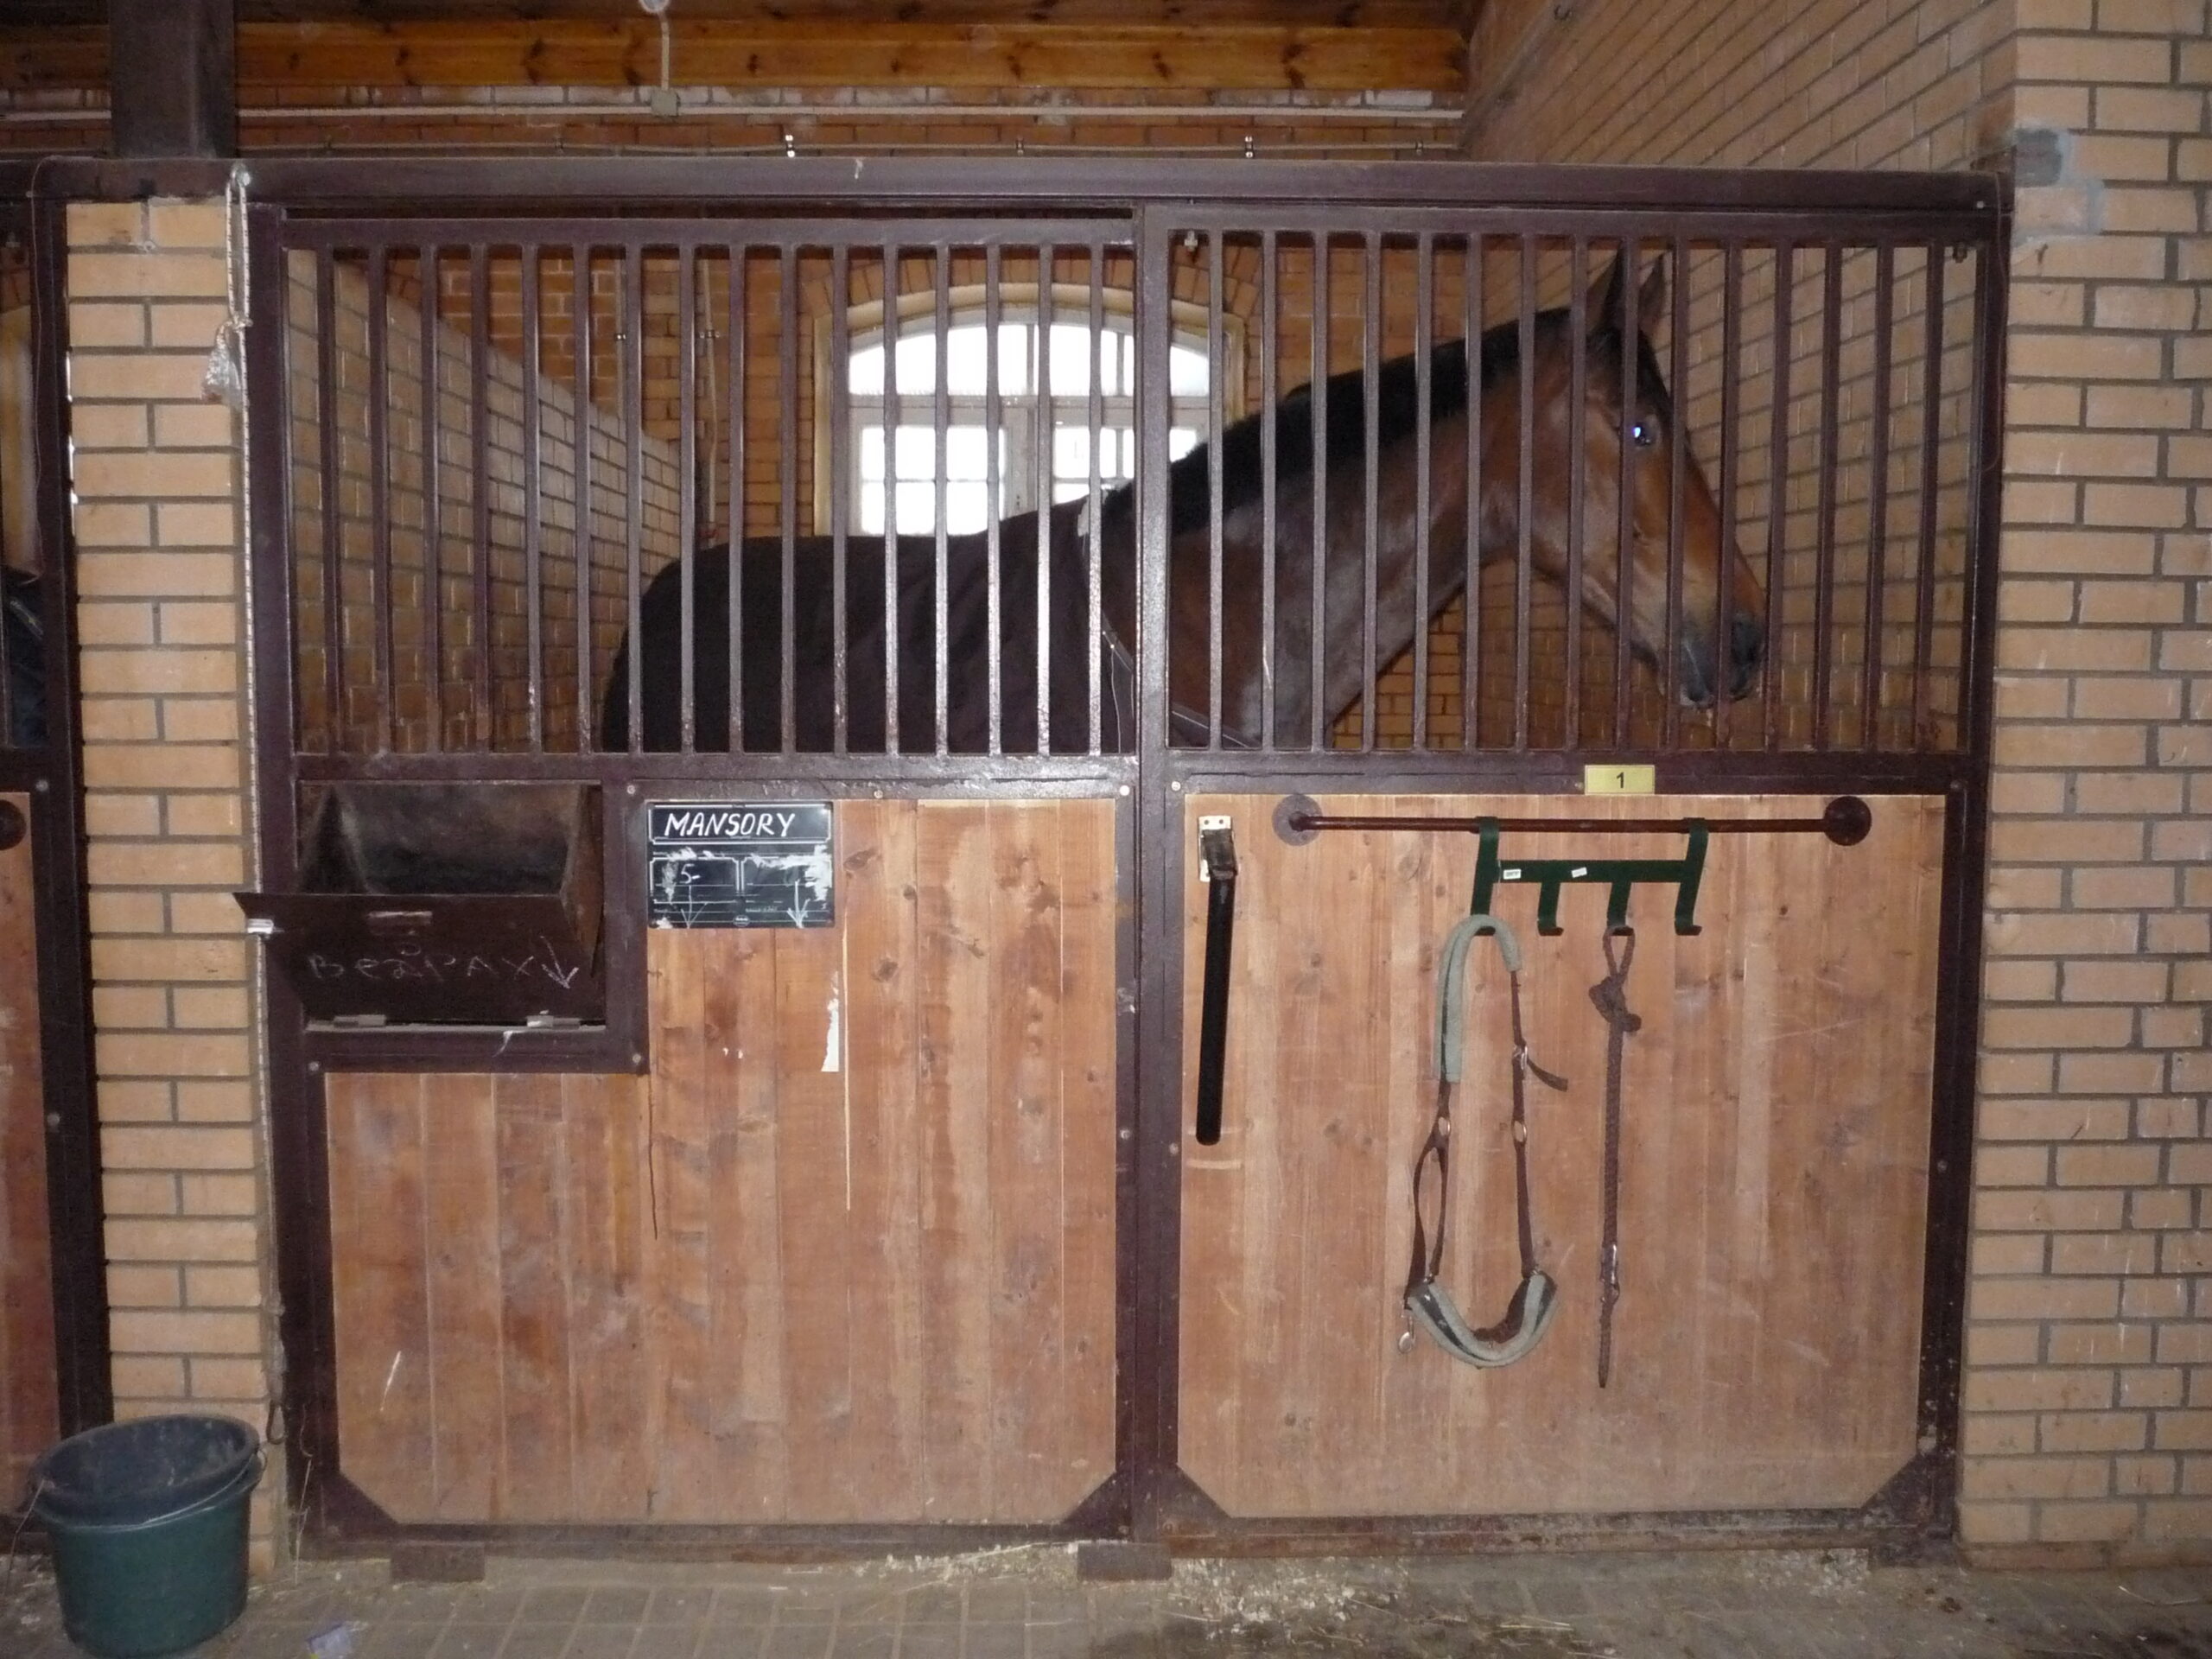 HORSE STALLS AND PARTITIONS